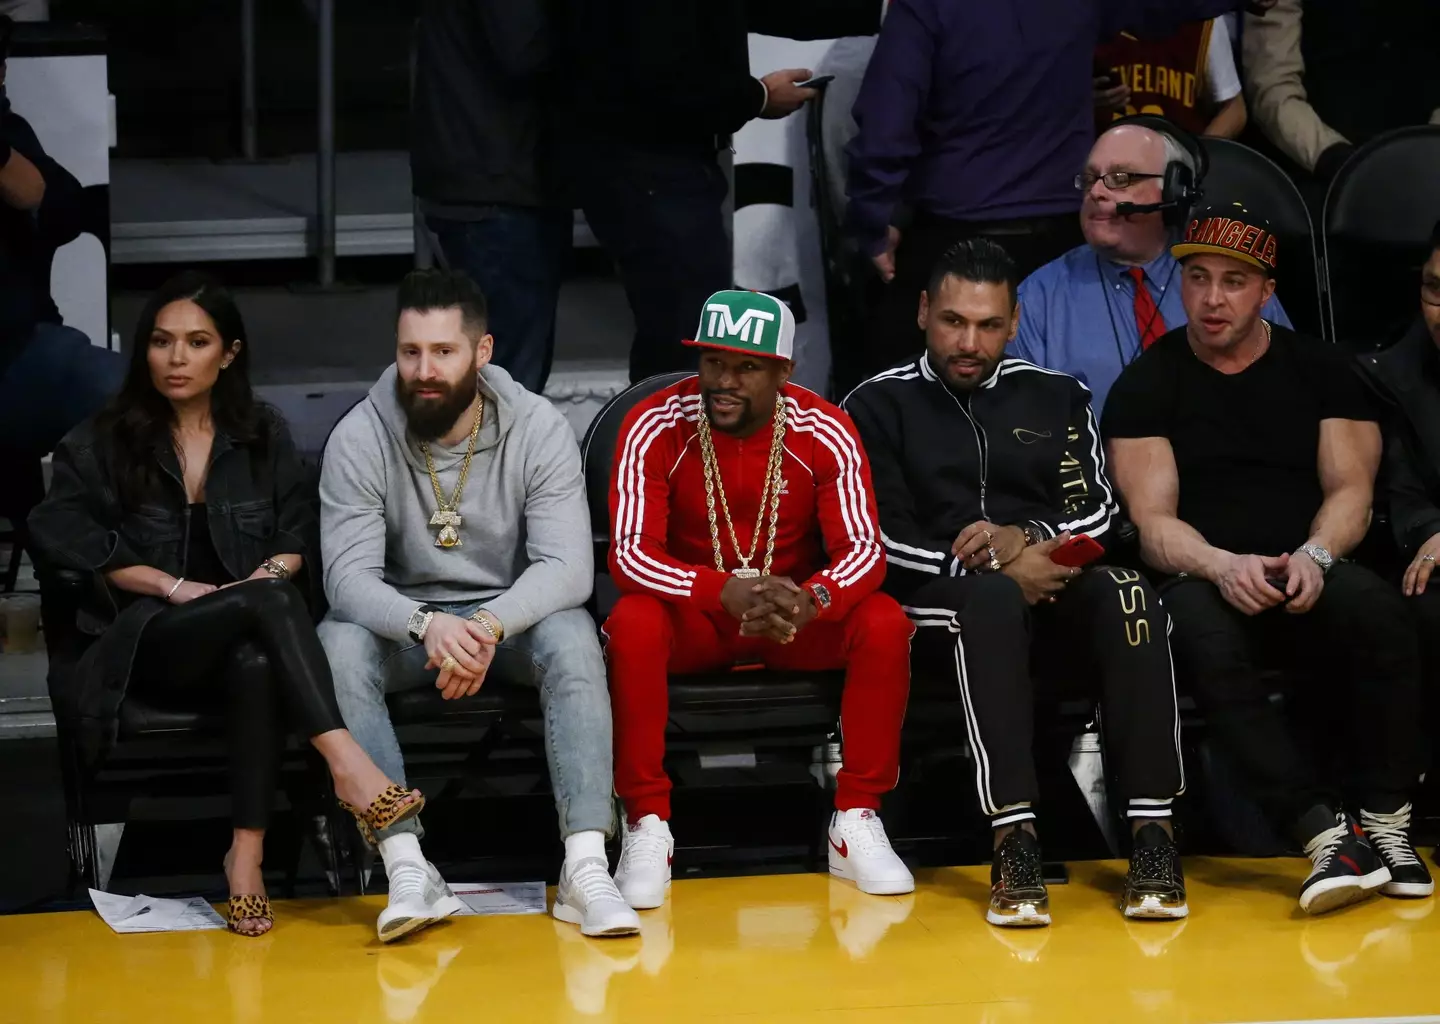 Mayweather at an NBA basketball game between the Los Angeles Lakers and New Orleans Pelicans. (Image